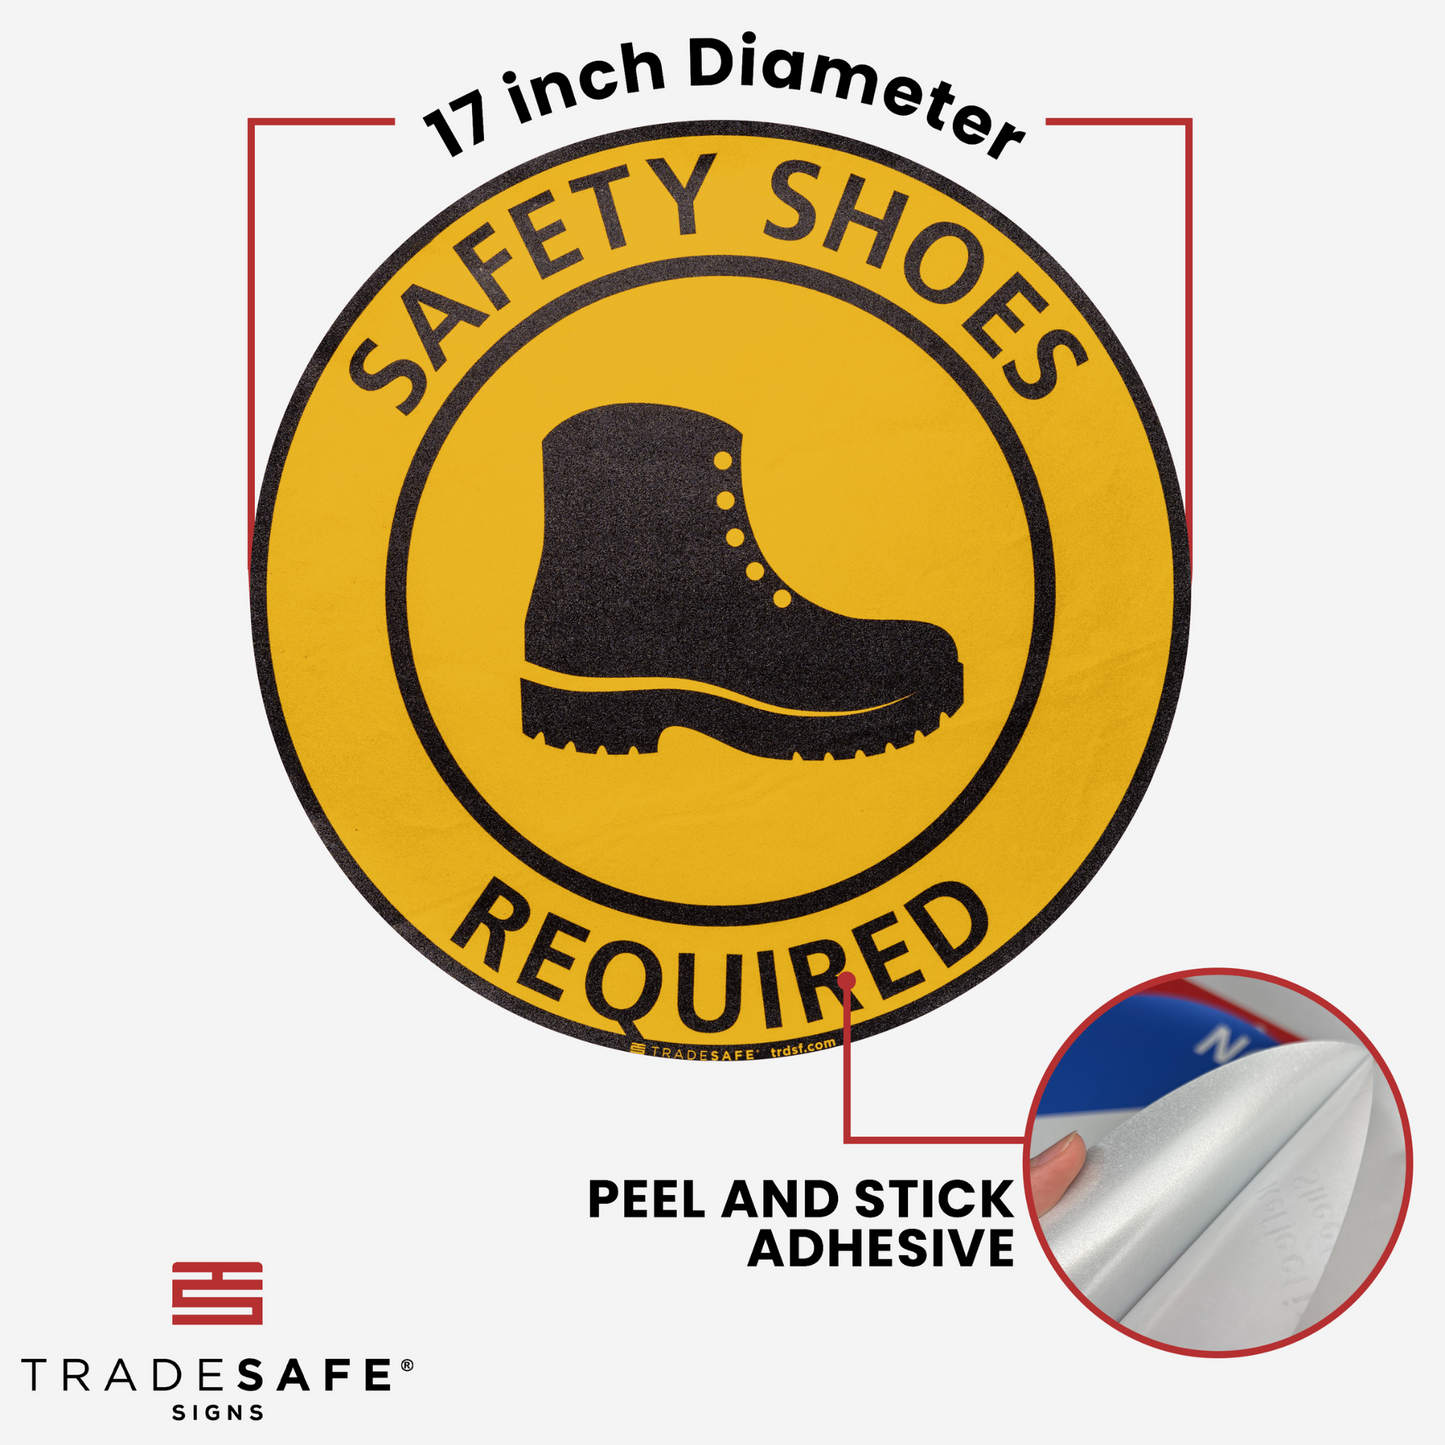 dimensions of "safety shoes required" sign